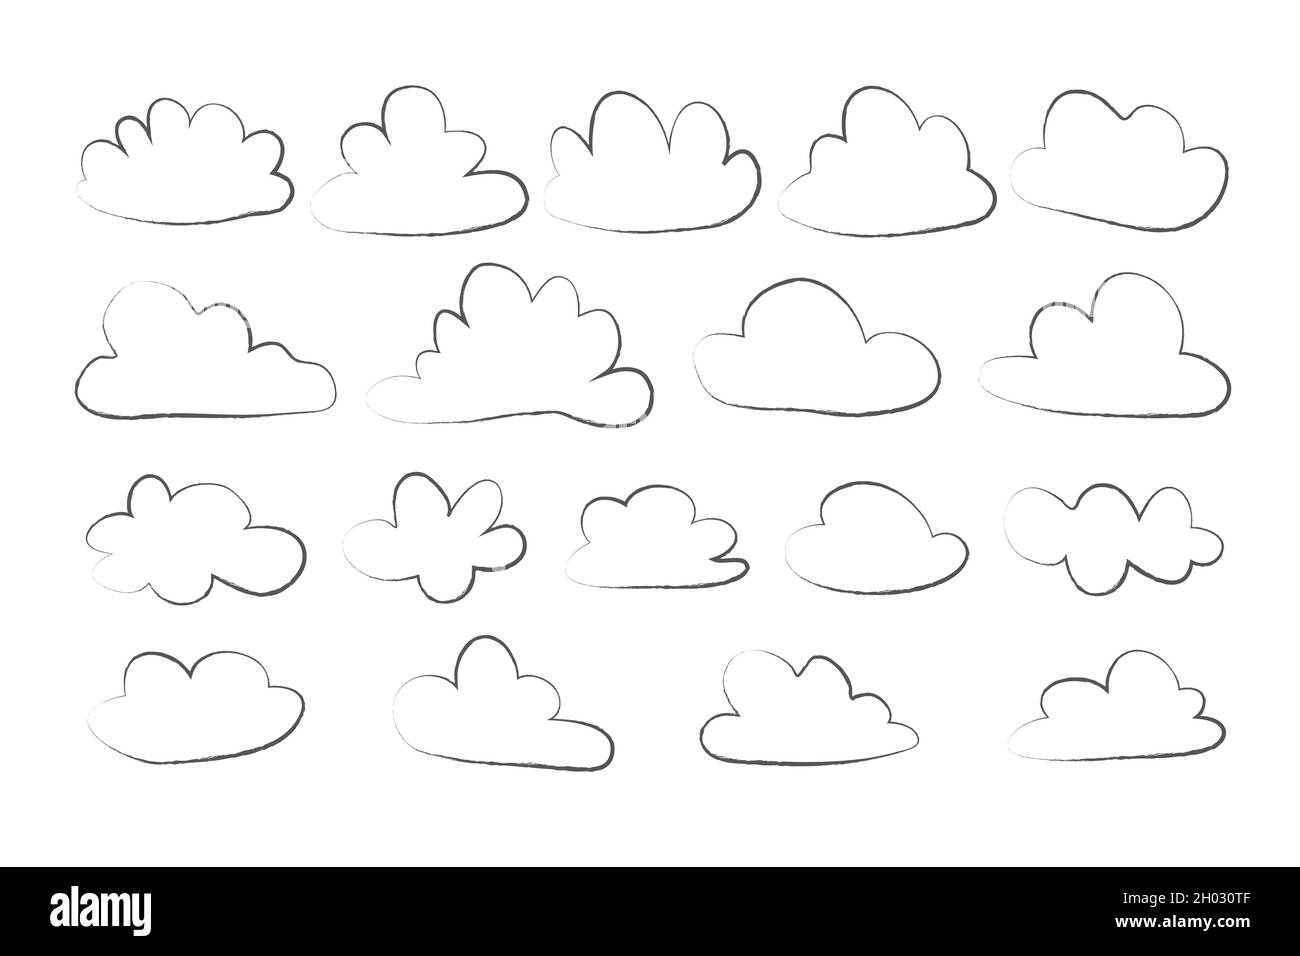 cloud set in hand drawn doodle sketch style, simple outline clouds Stock Vector